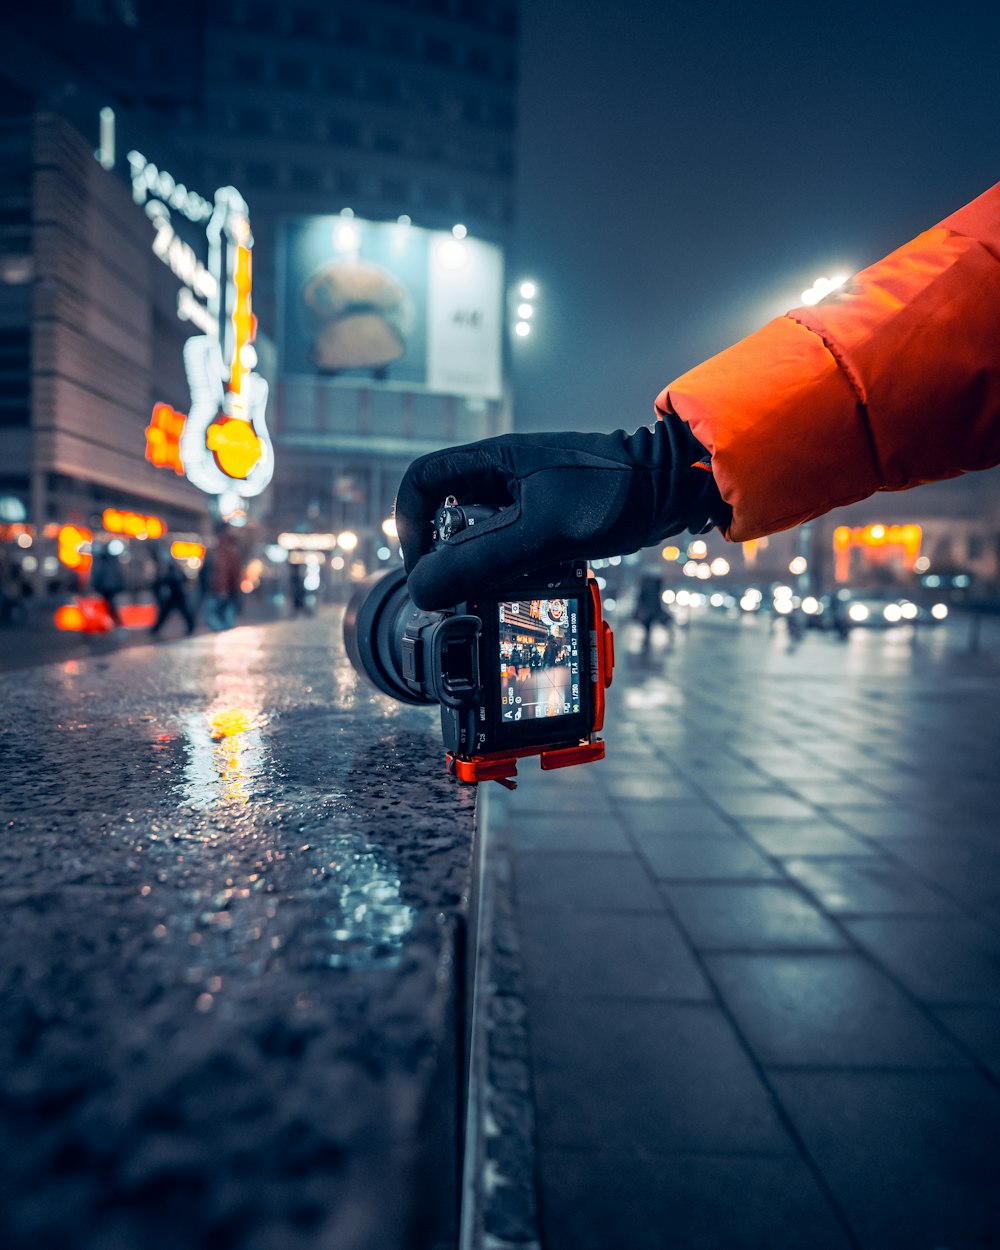 a person in an orange jacket is holding a camera